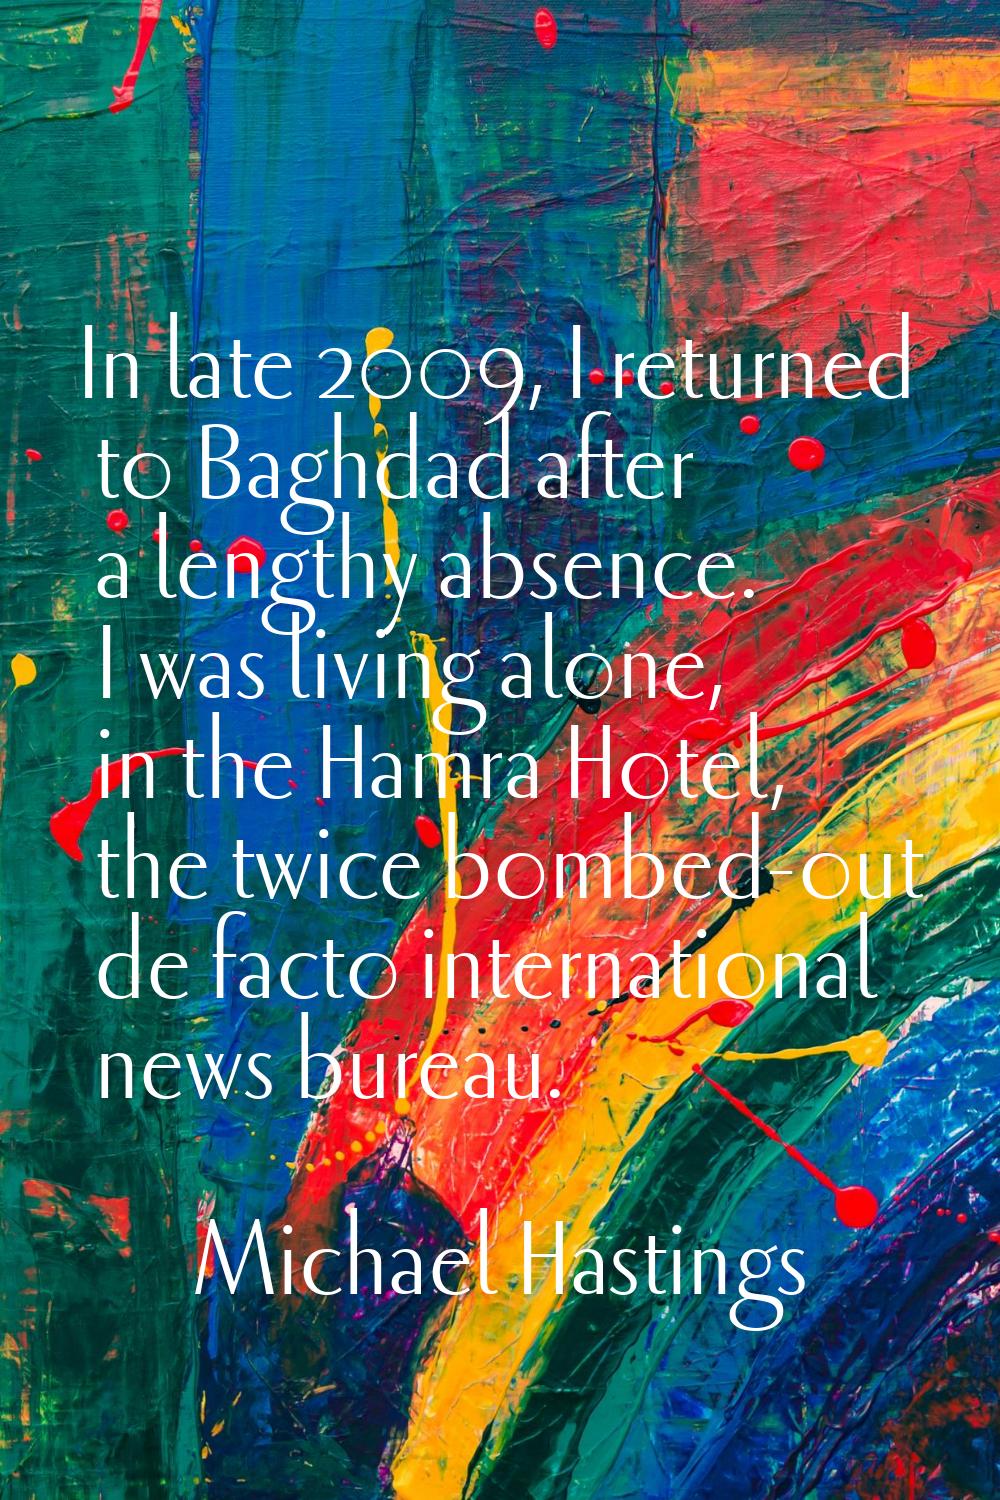 In late 2009, I returned to Baghdad after a lengthy absence. I was living alone, in the Hamra Hotel